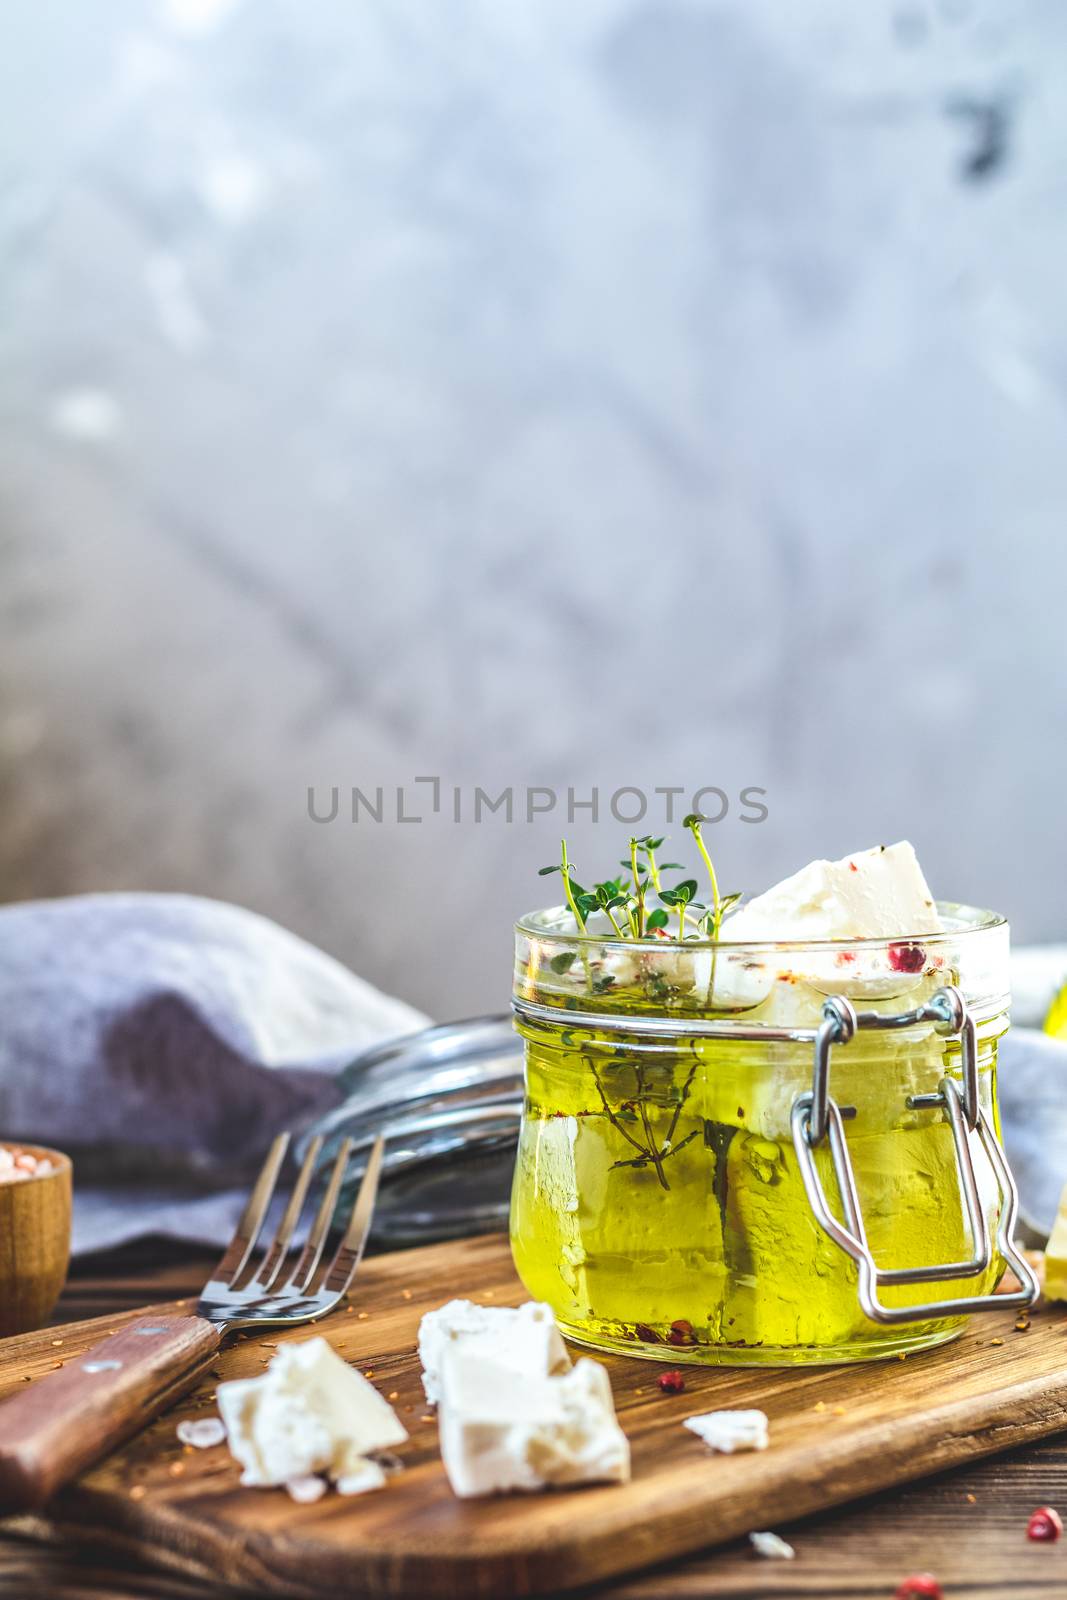 Feta cheese marinated in olive oil in glass jar by ArtSvitlyna